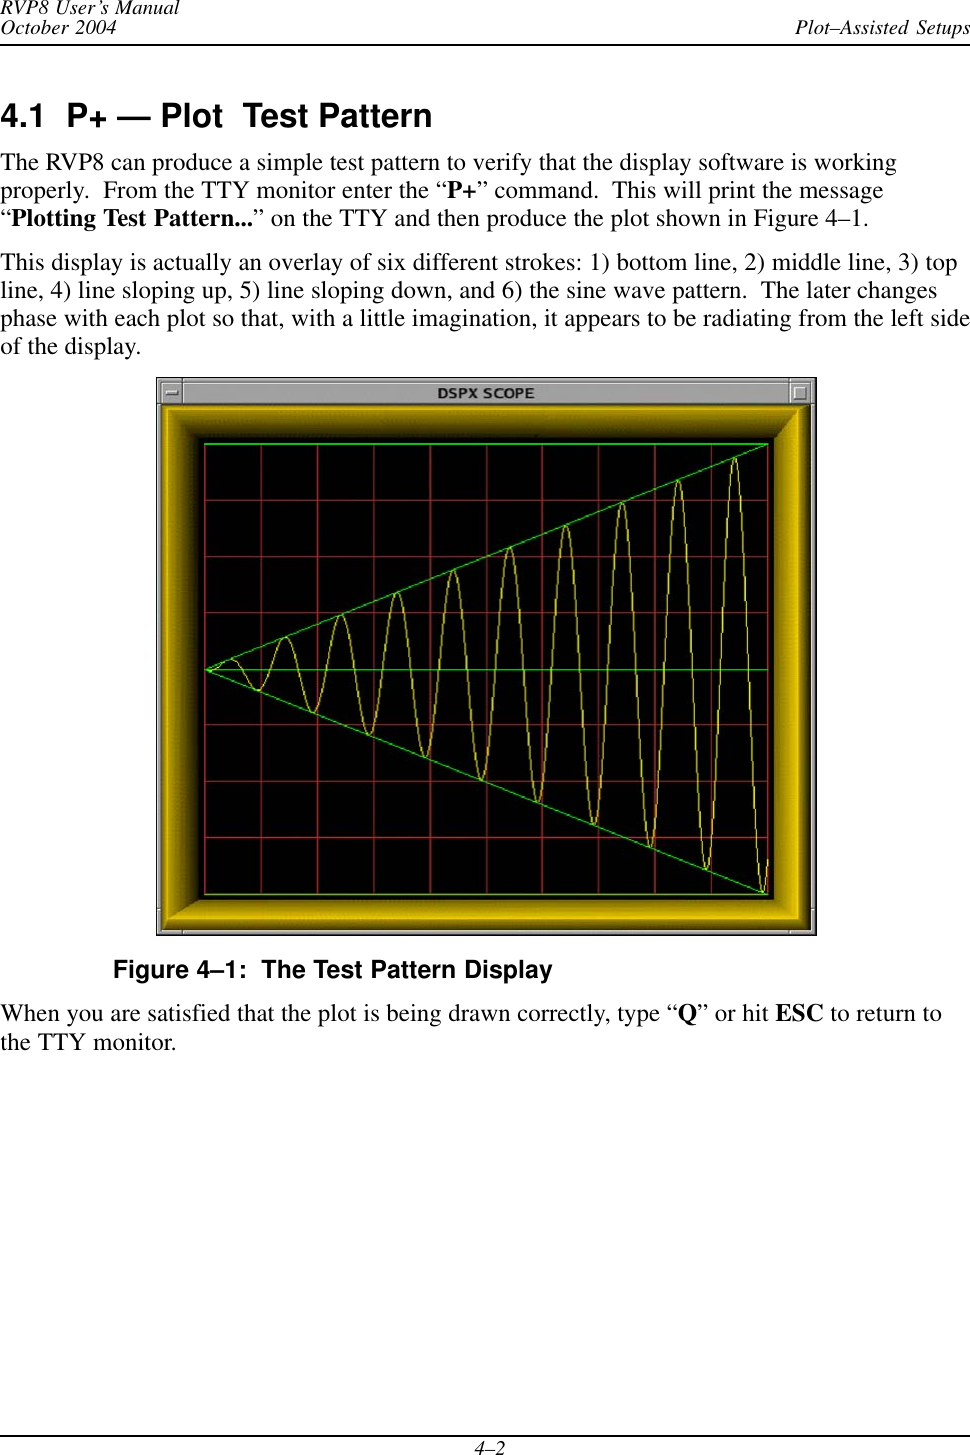 Plot–Assisted SetupsRVP8 User’s ManualOctober 20044–24.1  P+ — Plot  Test PatternThe RVP8 can produce a simple test pattern to verify that the display software is workingproperly.  From the TTY monitor enter the “P+” command.  This will print the message“Plotting Test Pattern...” on the TTY and then produce the plot shown in Figure 4–1.This display is actually an overlay of six different strokes: 1) bottom line, 2) middle line, 3) topline, 4) line sloping up, 5) line sloping down, and 6) the sine wave pattern.  The later changesphase with each plot so that, with a little imagination, it appears to be radiating from the left sideof the display.Figure 4–1:  The Test Pattern DisplayWhen you are satisfied that the plot is being drawn correctly, type “Q” or hit ESC to return tothe TTY monitor.